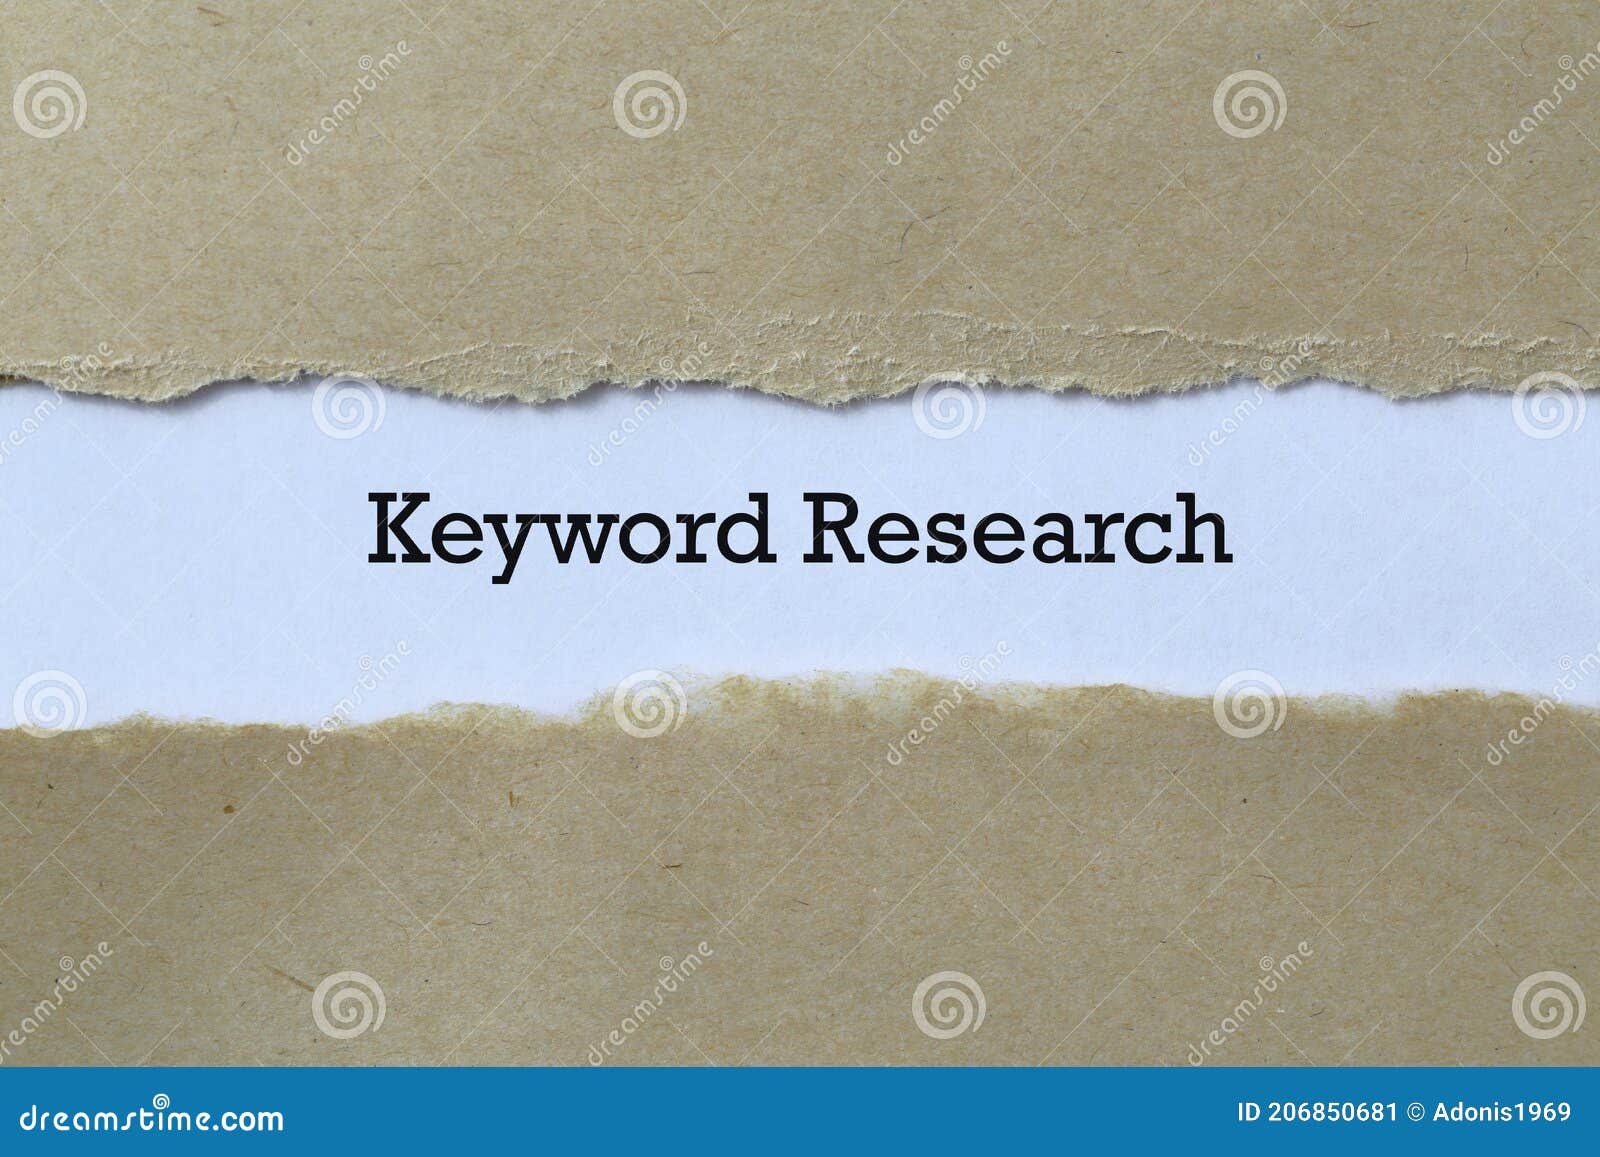 keyword research on paper